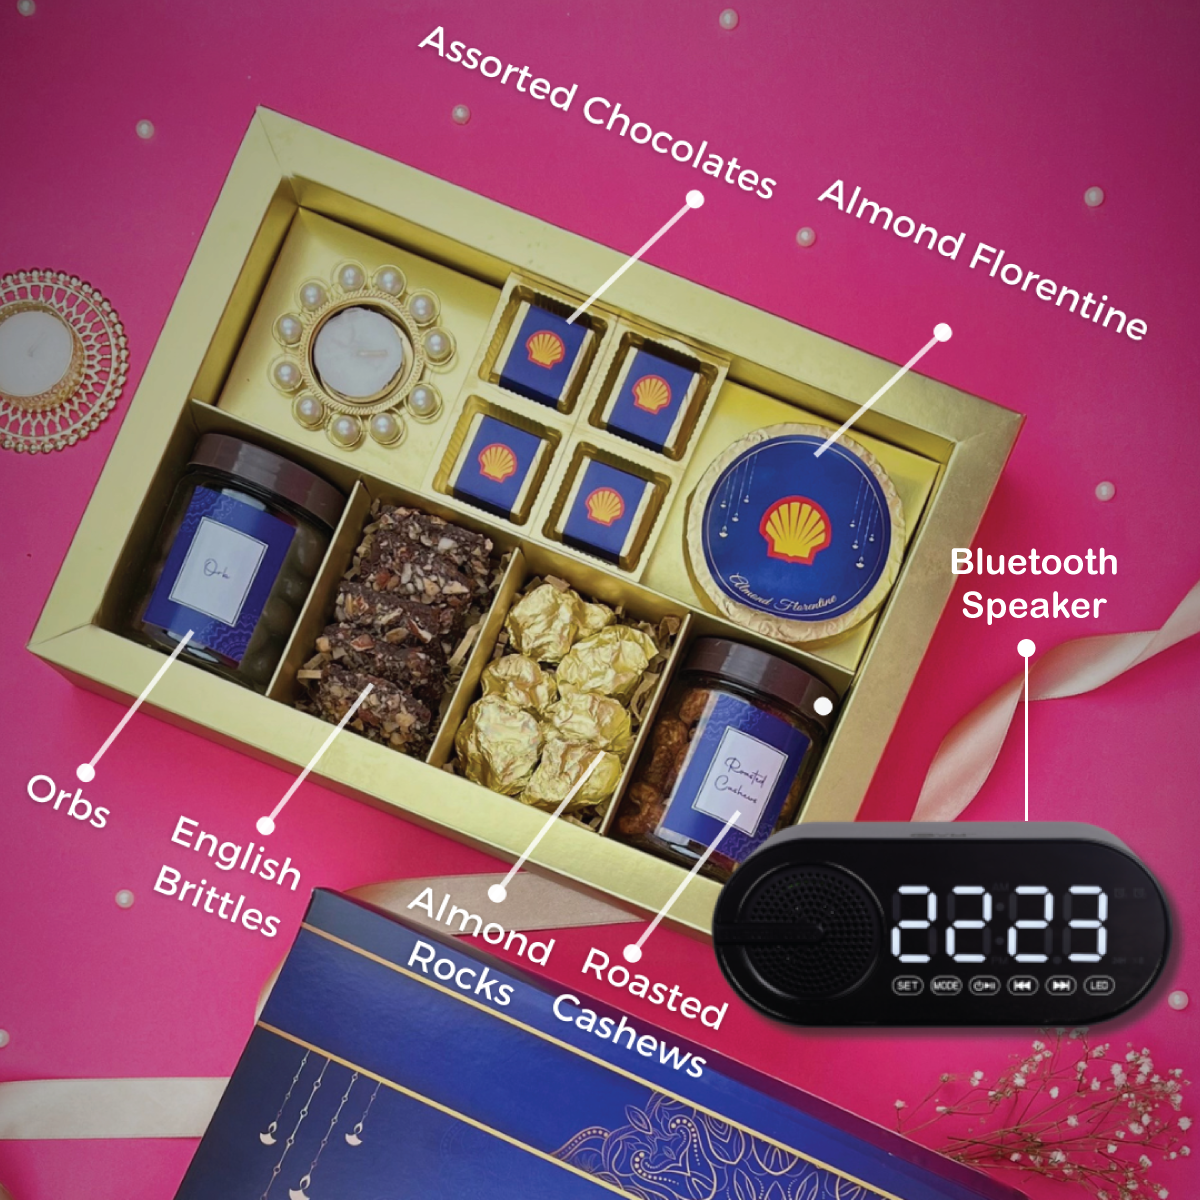 Premium Customized Diwali Greeting Card, Sweets, Chocolates, Diya, and Bluetooth Speaker Combo Gift Set - For Employees, Dealers, Customers, Stakeholders, Personal or Corporate Diwali Gifting TGMCVA48